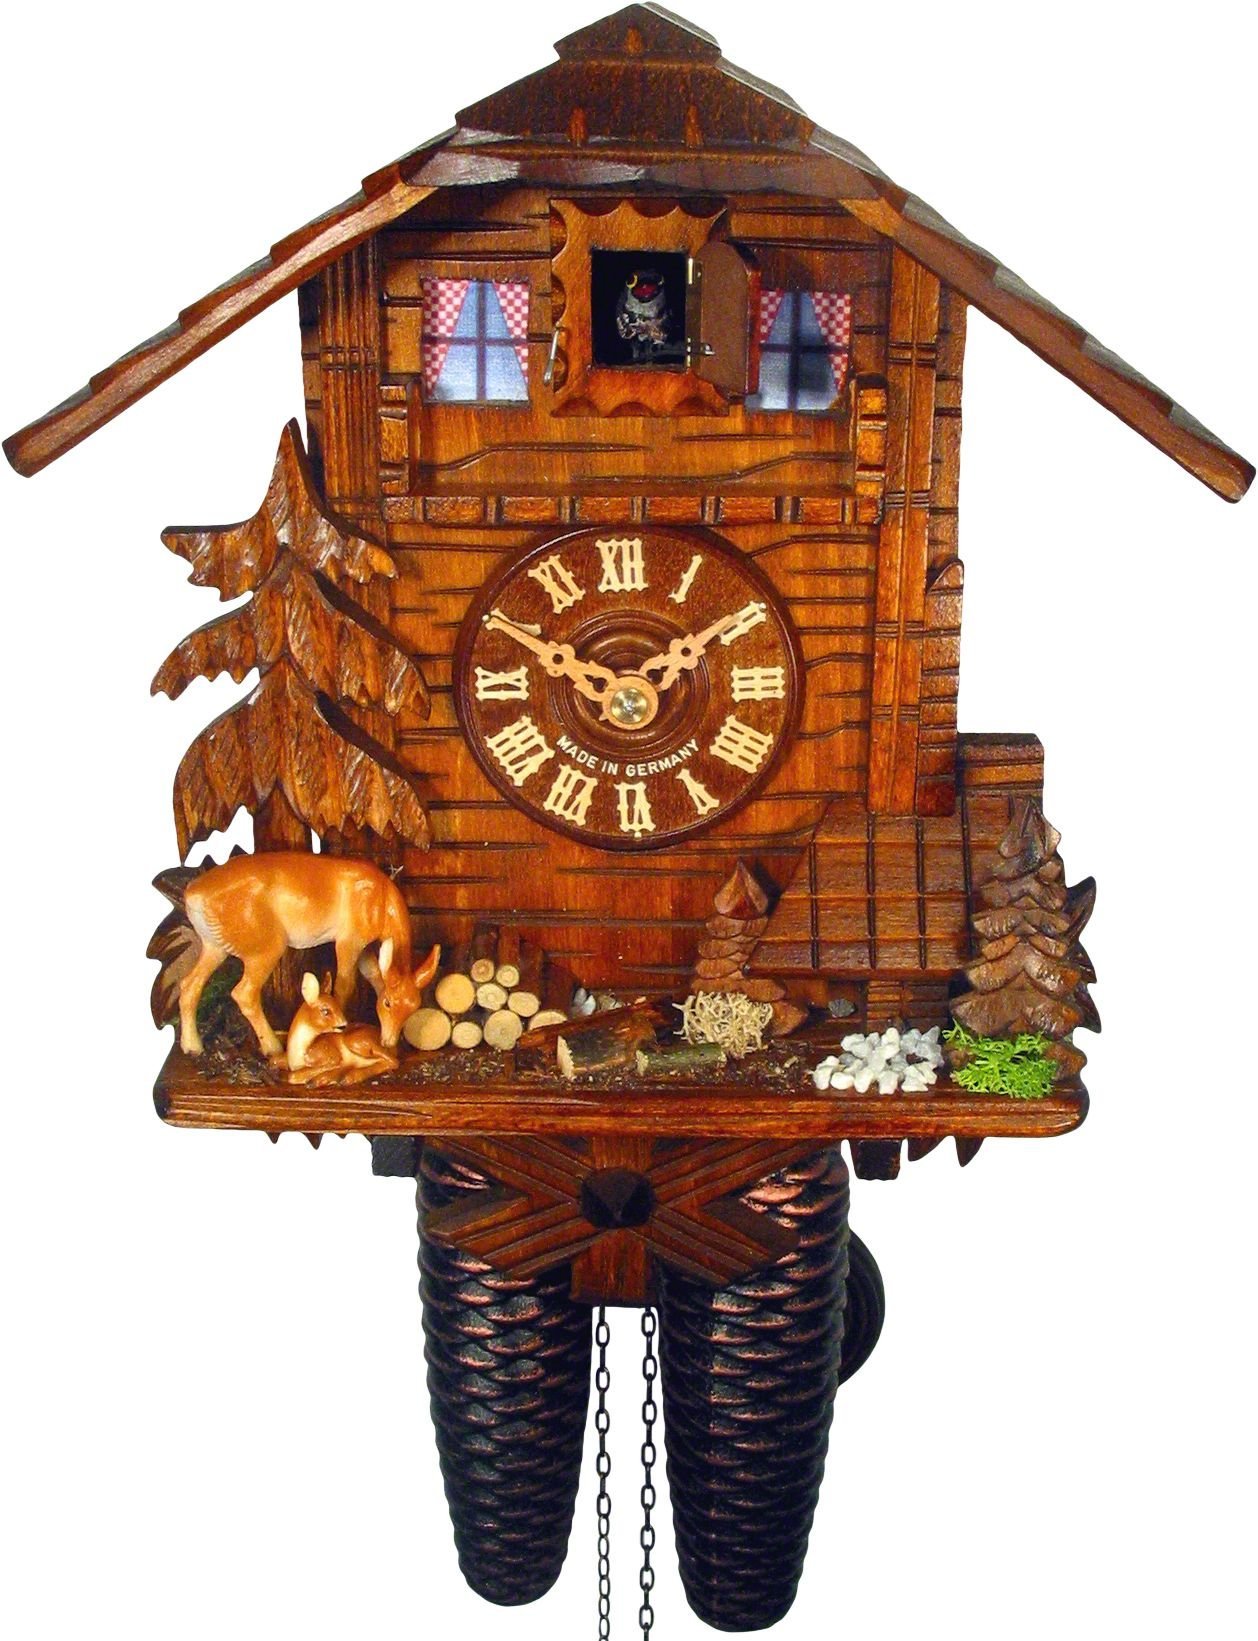 Cuckoo Clock Chalet Style 8 Day Movement 28cm by August Schwer